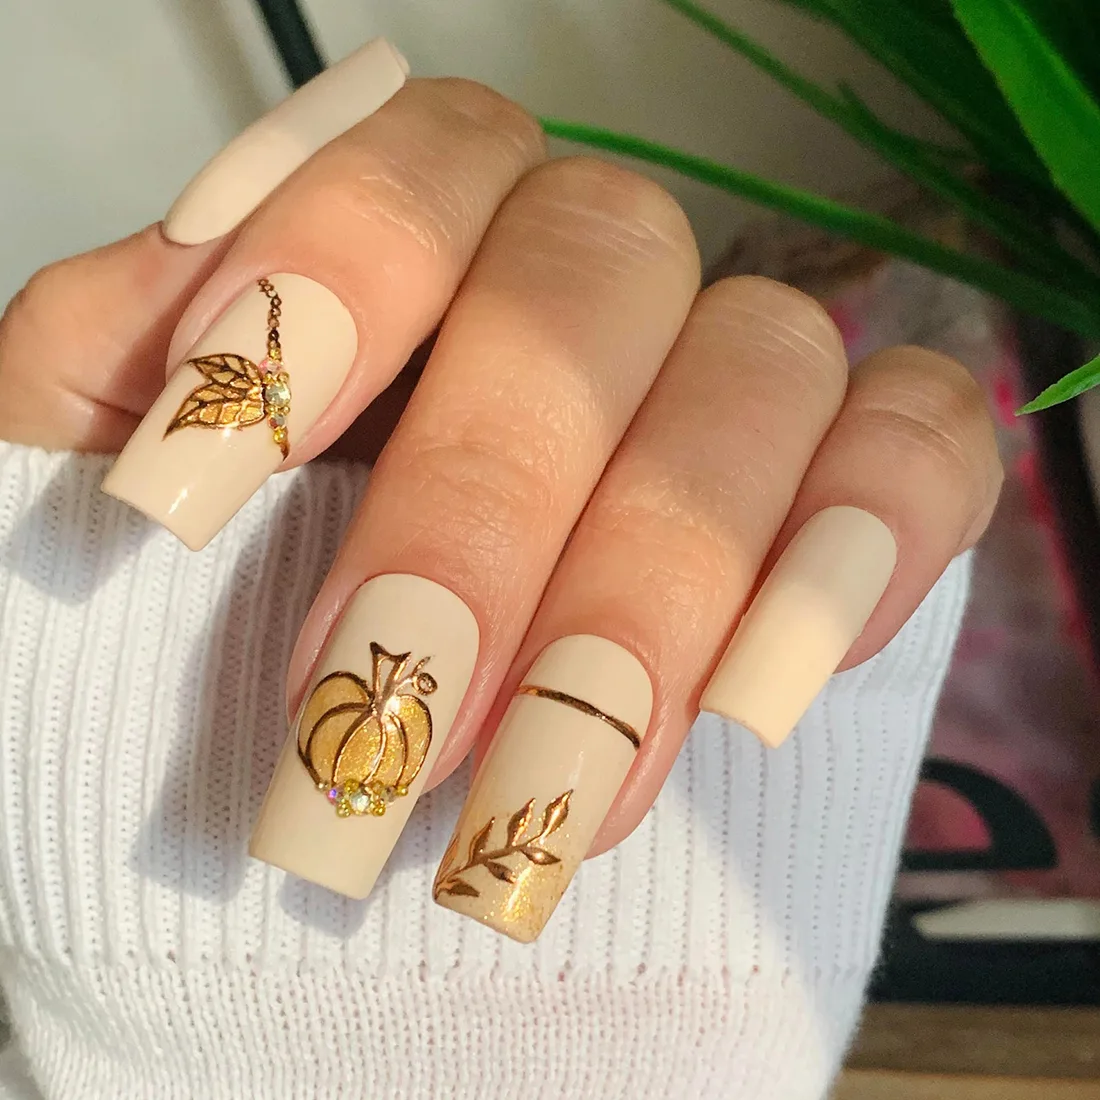 Cream beige nails with gold accents in leaf and pumpkin designs | Trendy Fall Nail Designs You Can Buy as Press-Ons on Etsy | Slashed Beauty